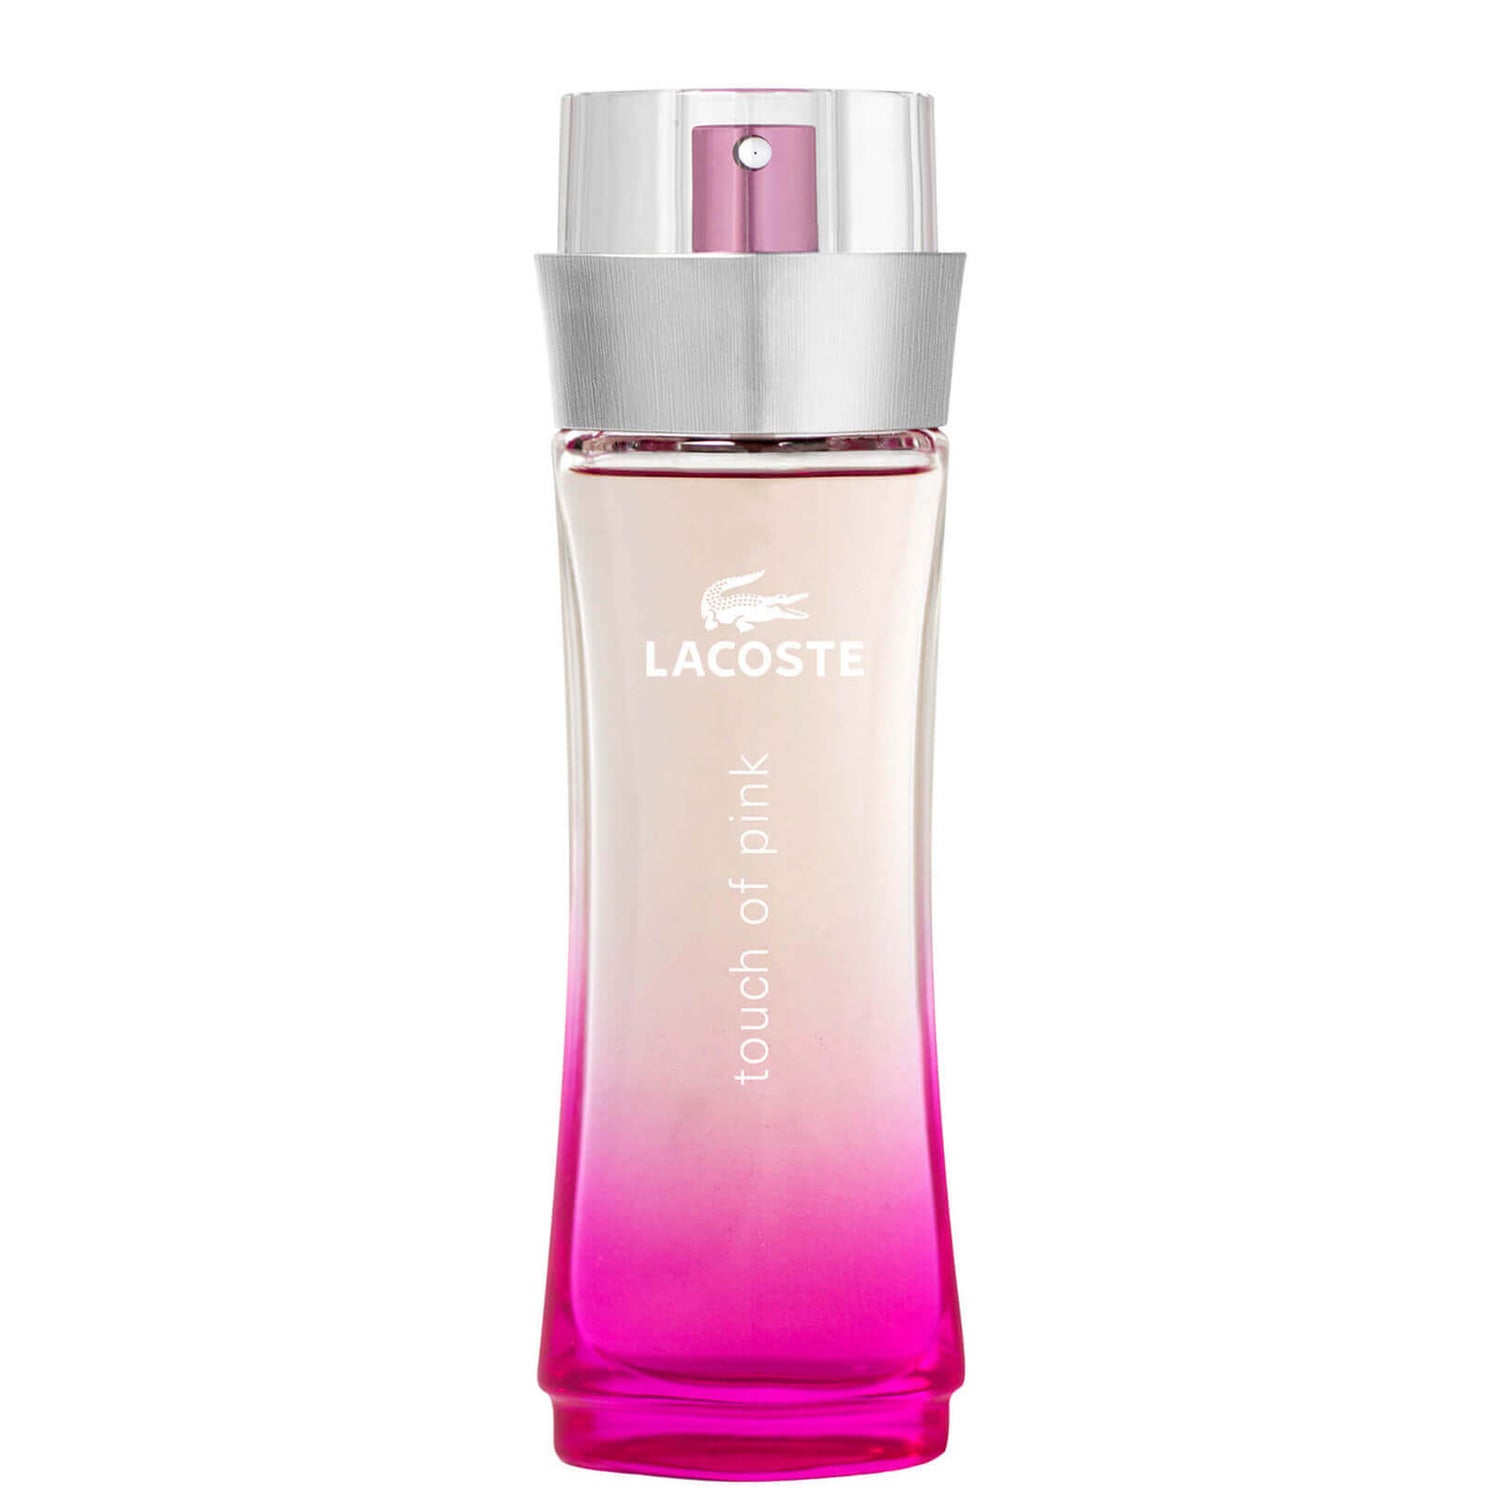 Lacoste Touch Of Pink For Her Eau de Toilette 90ml